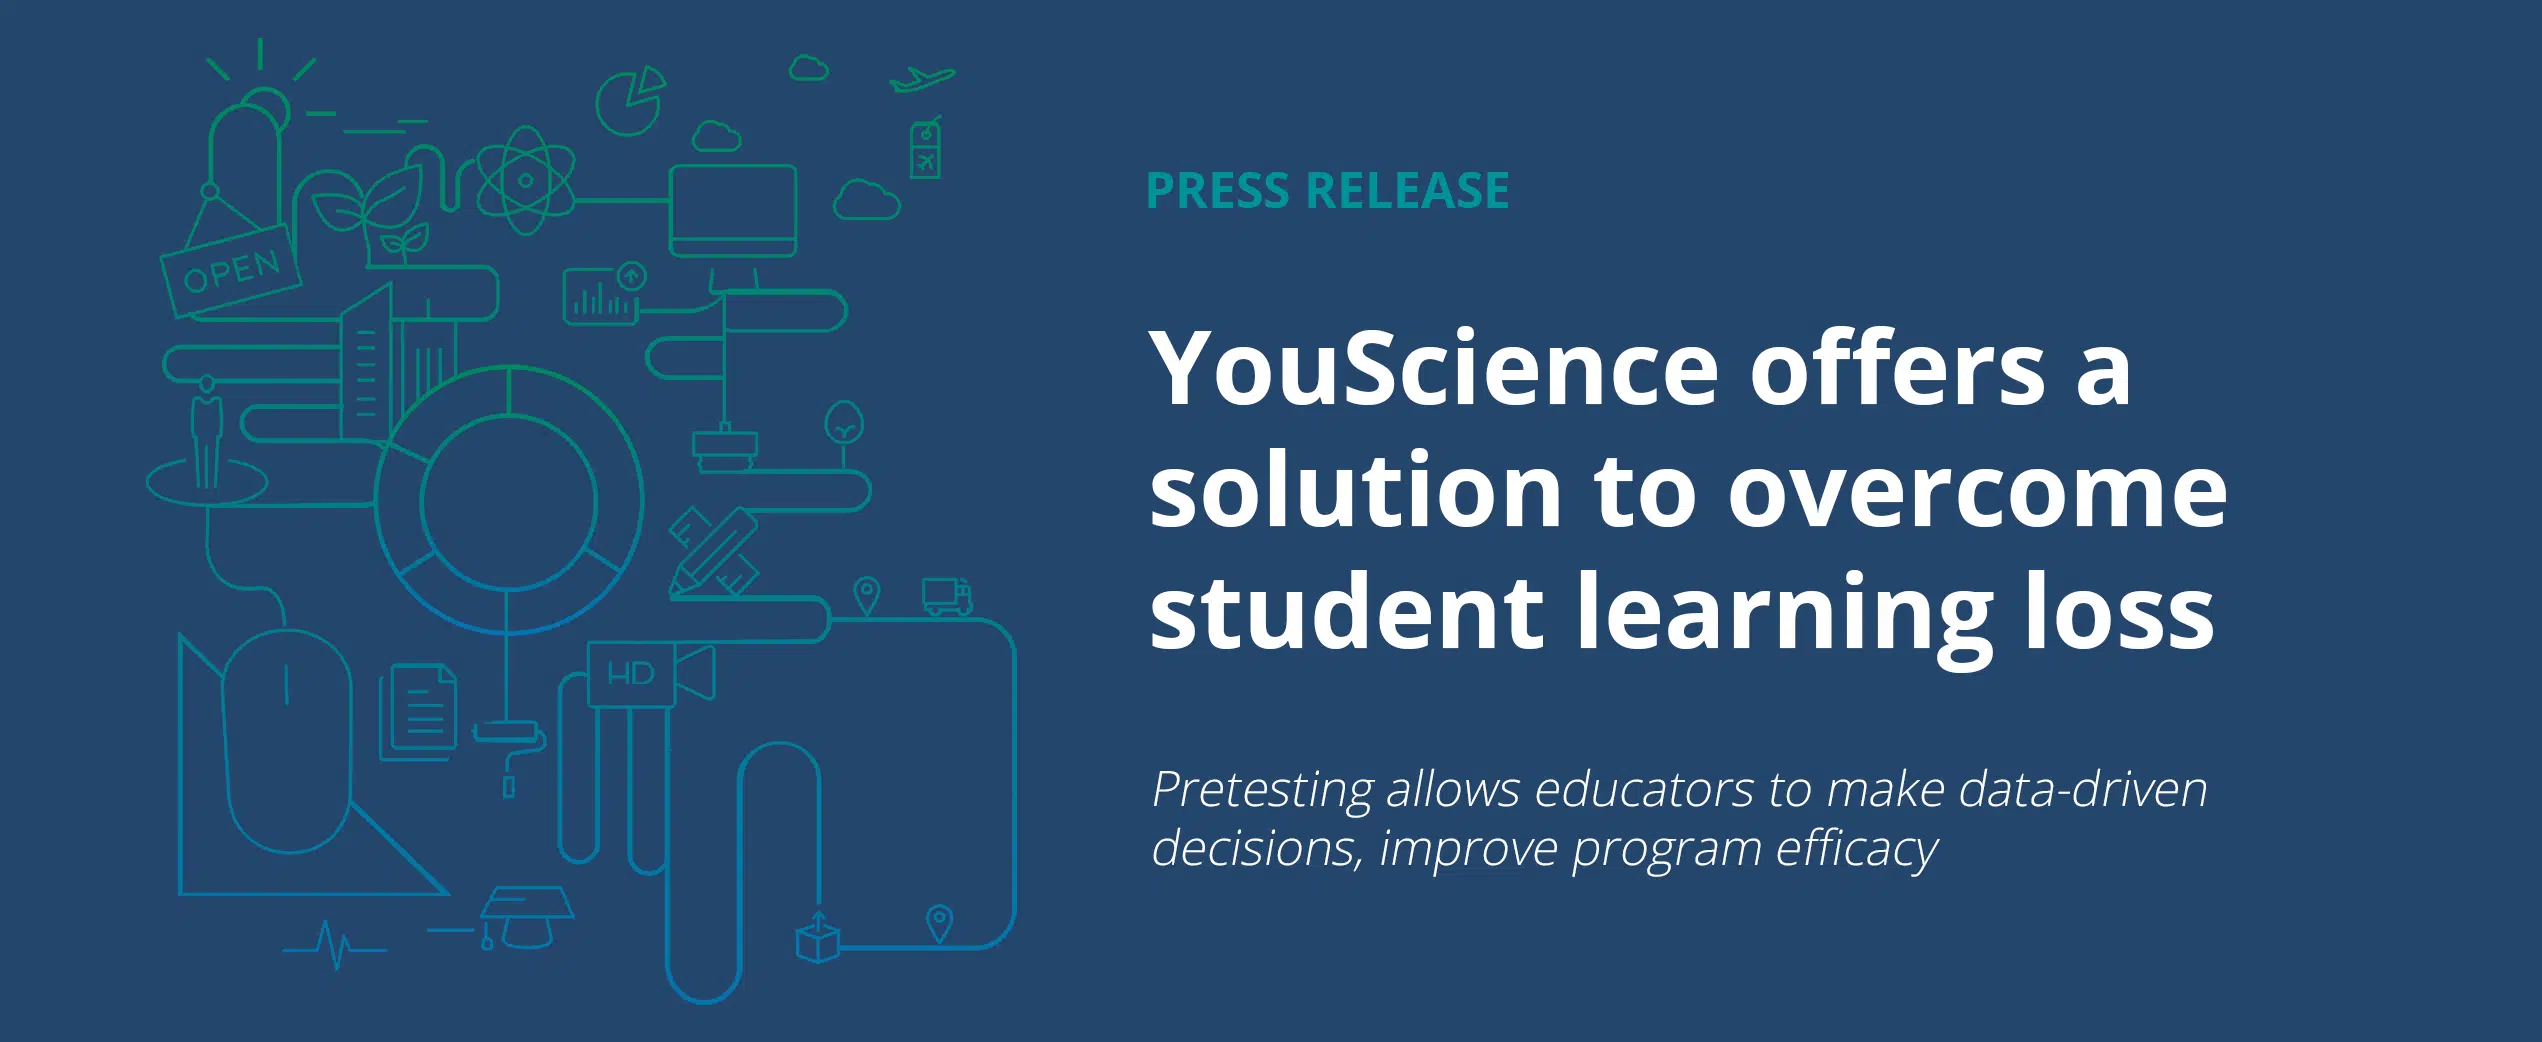 YouScience offers a solution to overcome student learning loss